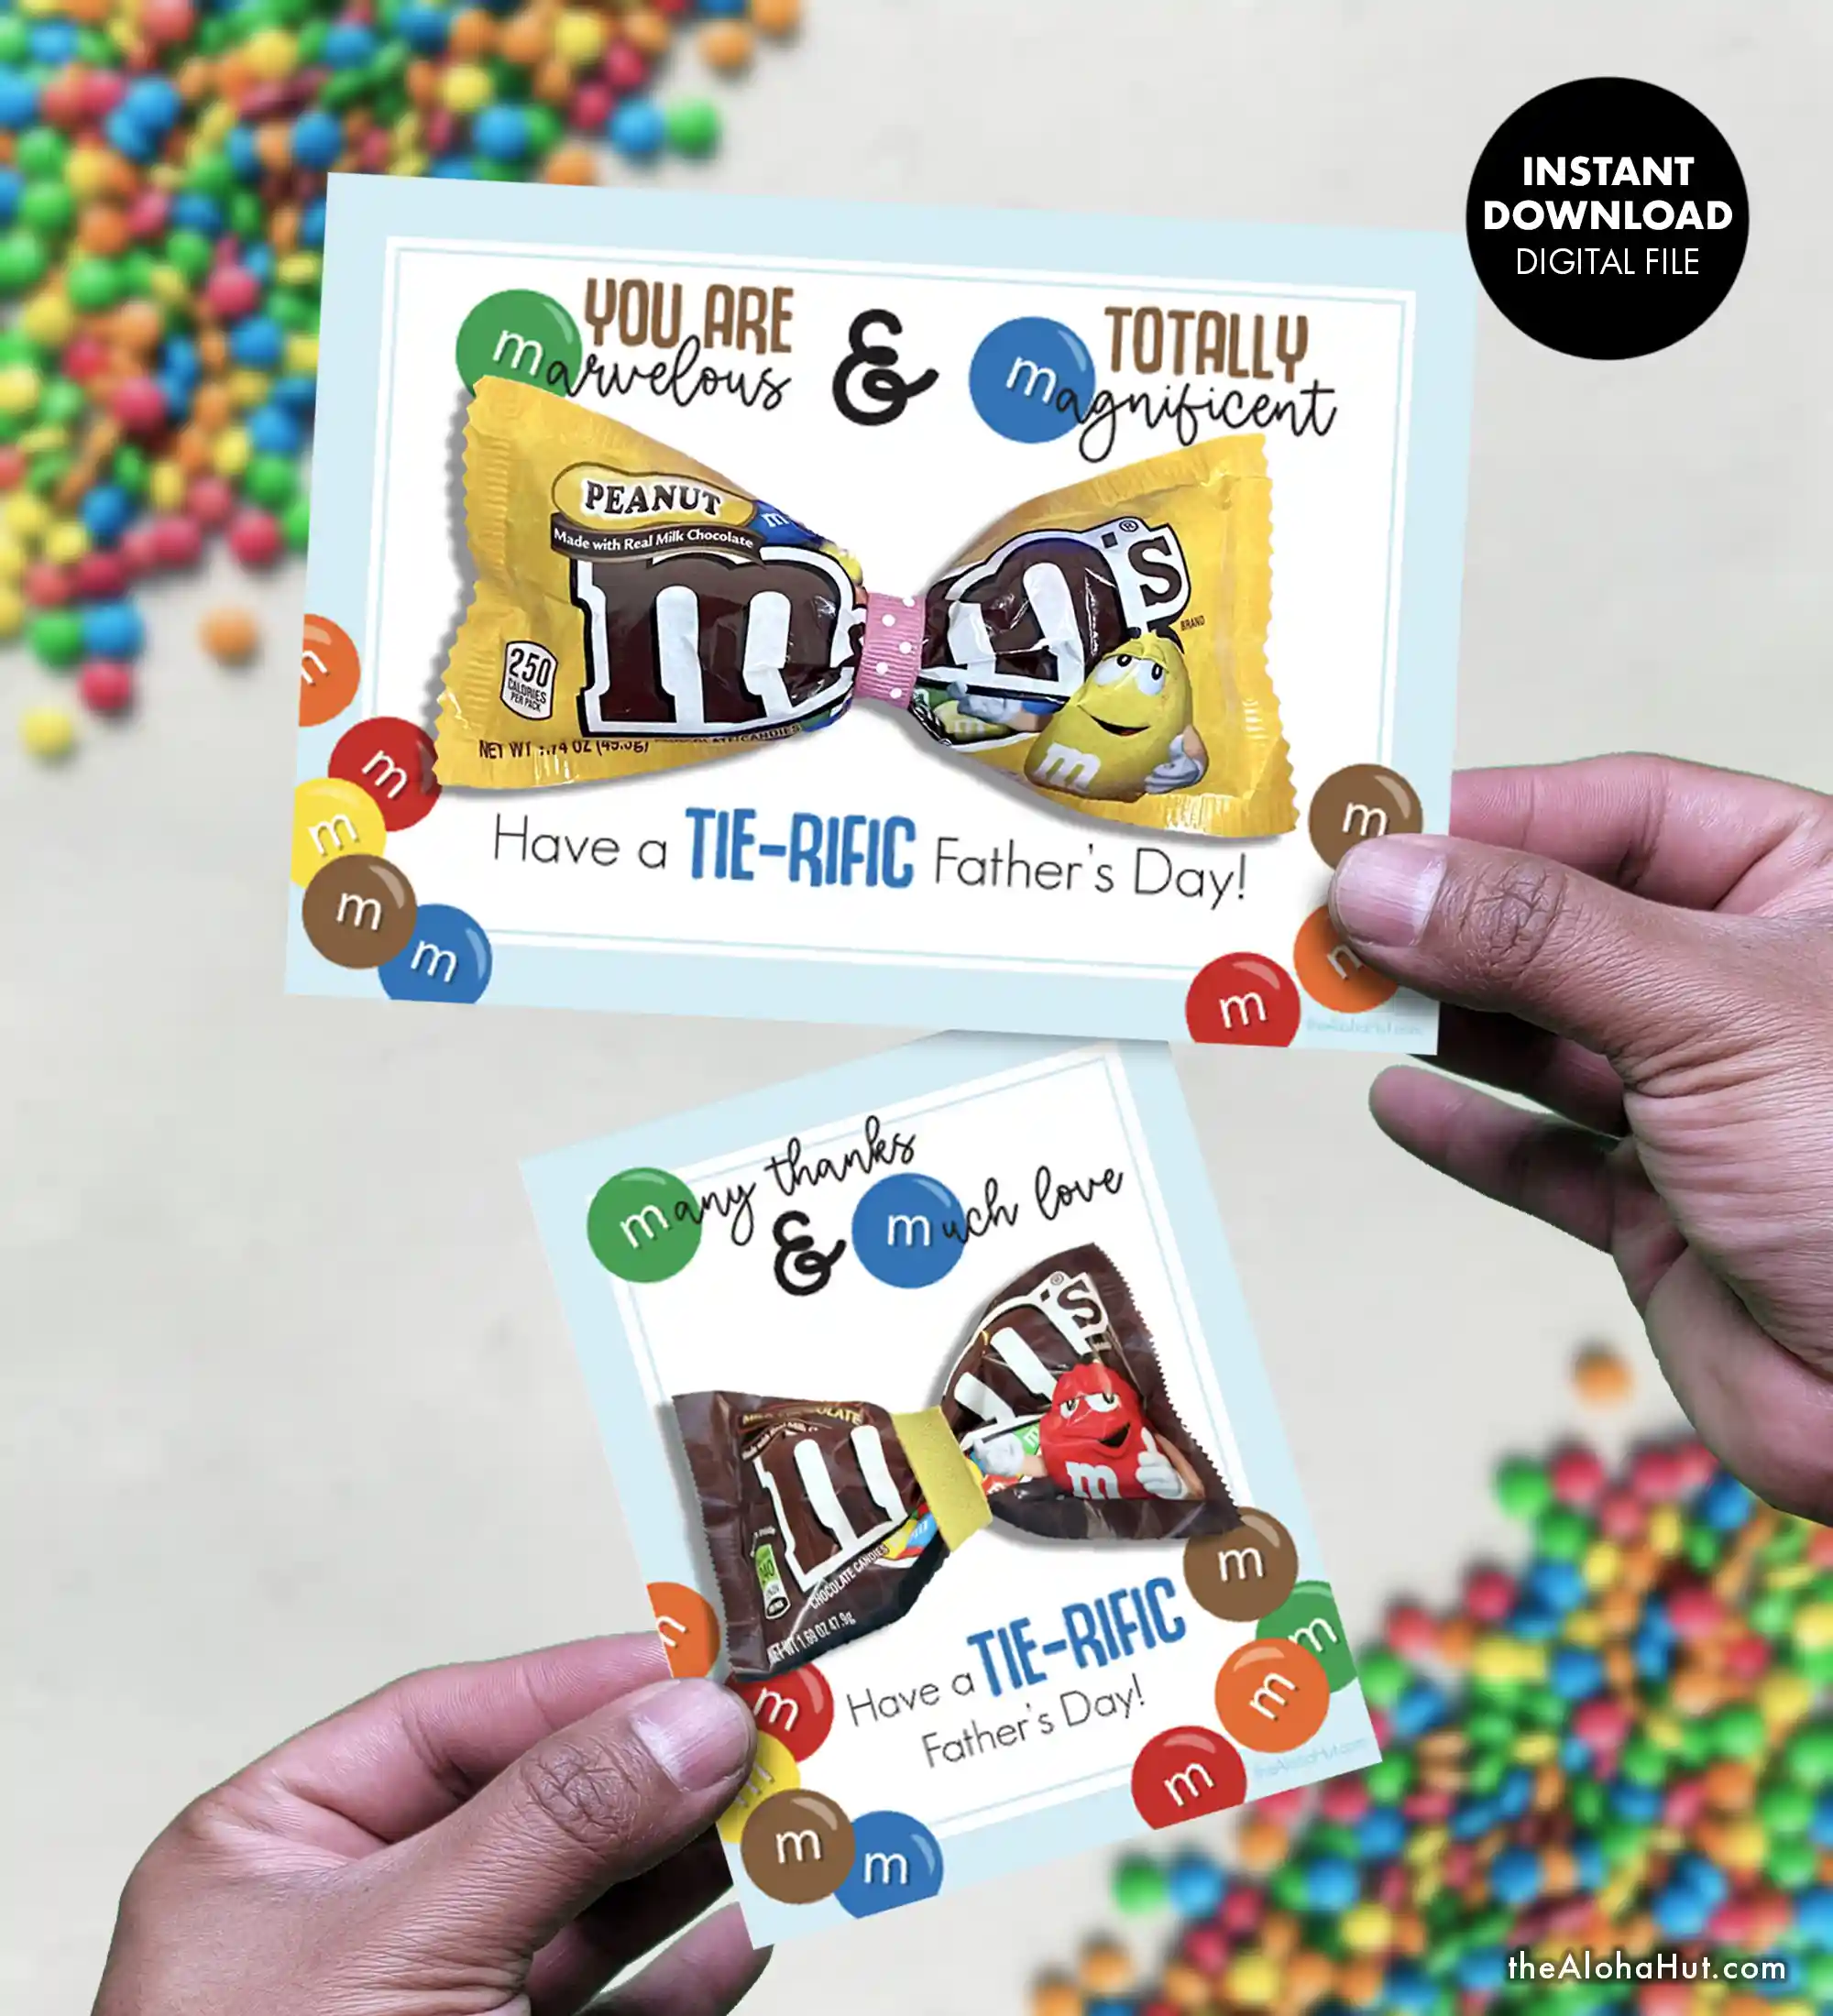 Easy Father's Day gift ideas and printable cards for dad or grandpa. This printable Father's Day M&M card is an easy way to tell dad or grandpa how marvelous and magnificent they are! Simply print the M&M Father's Day card (comes in two sizes), cut out, and attach M&Ms. Also makes a simple and inexpensive gift for church Father's Day gift ideas or for school kids to give dad (print for preschool Father's Day gift from the kids).